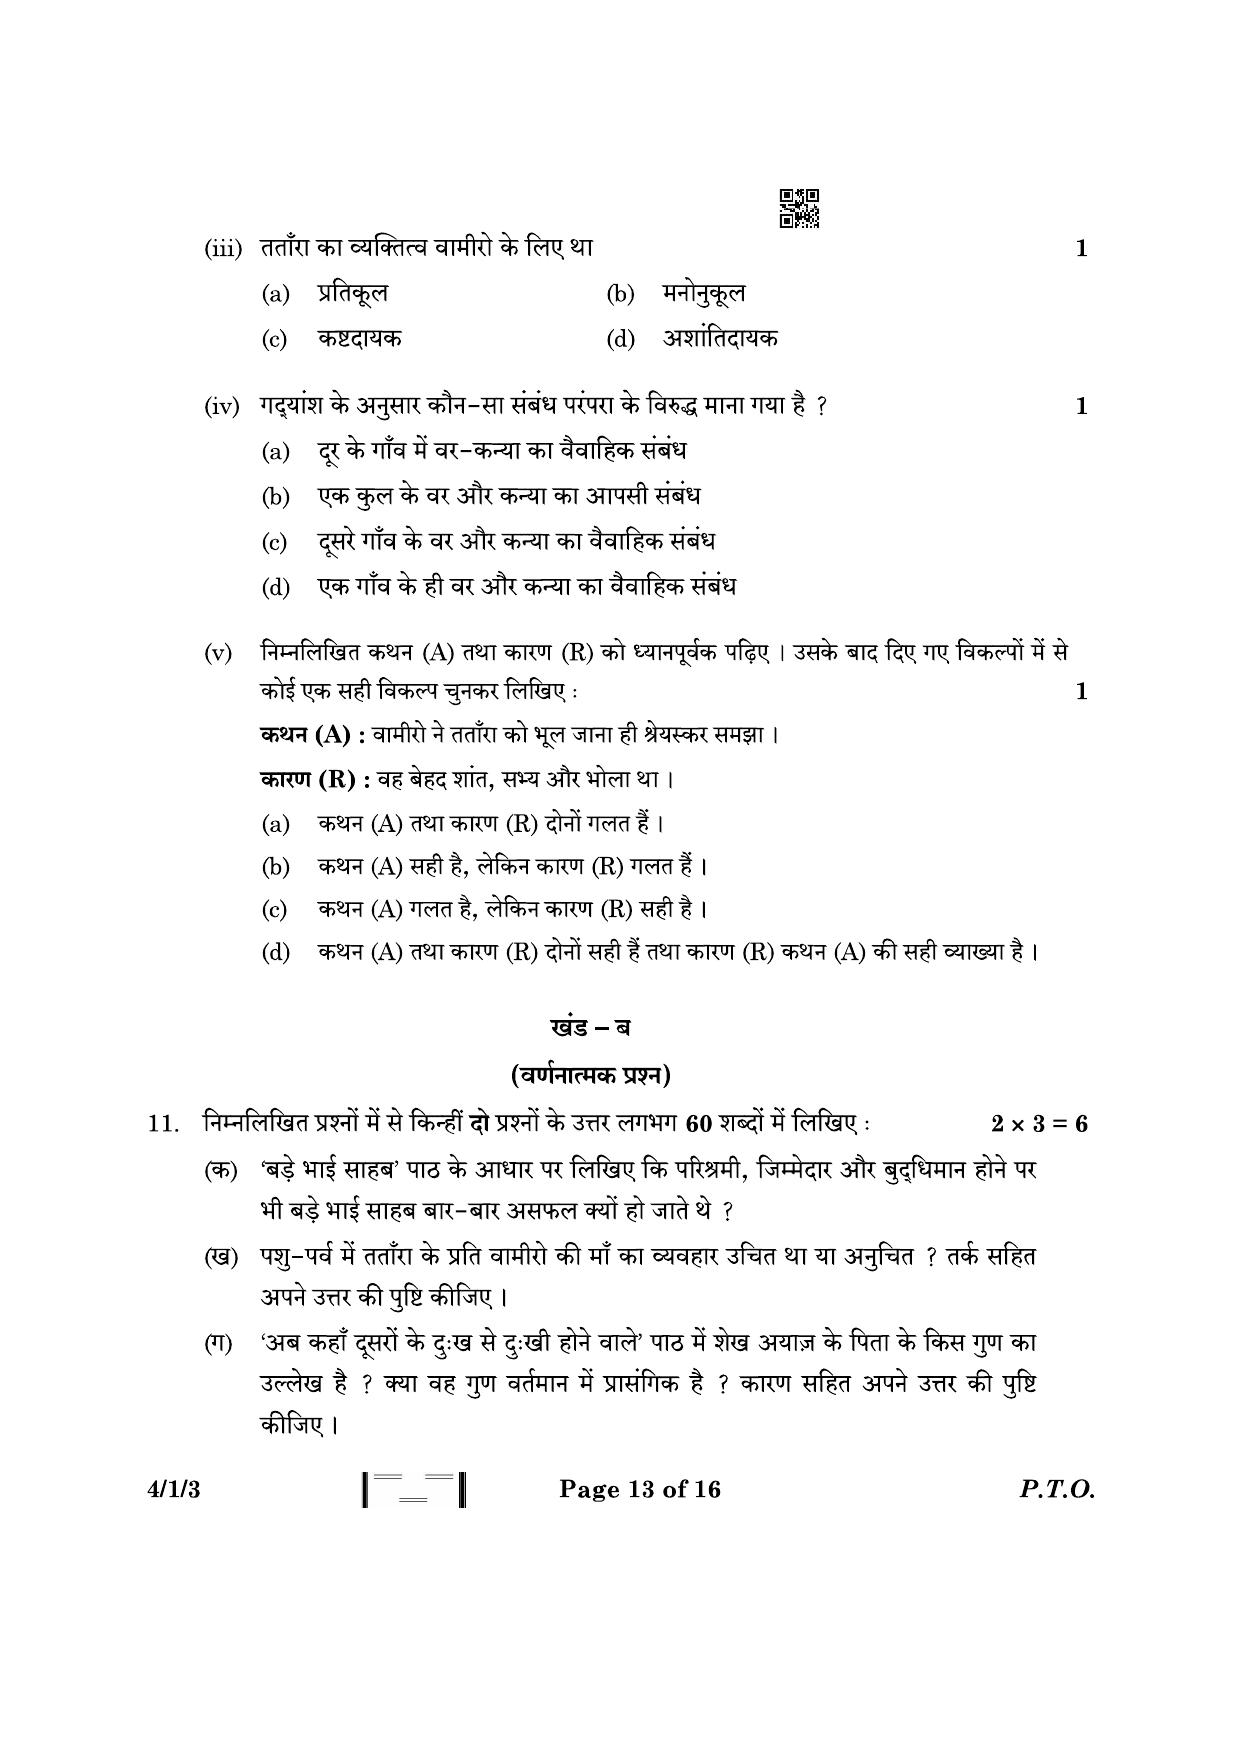 CBSE Class 10 4-1-3 Hindi B 2023 Question Paper - Page 13